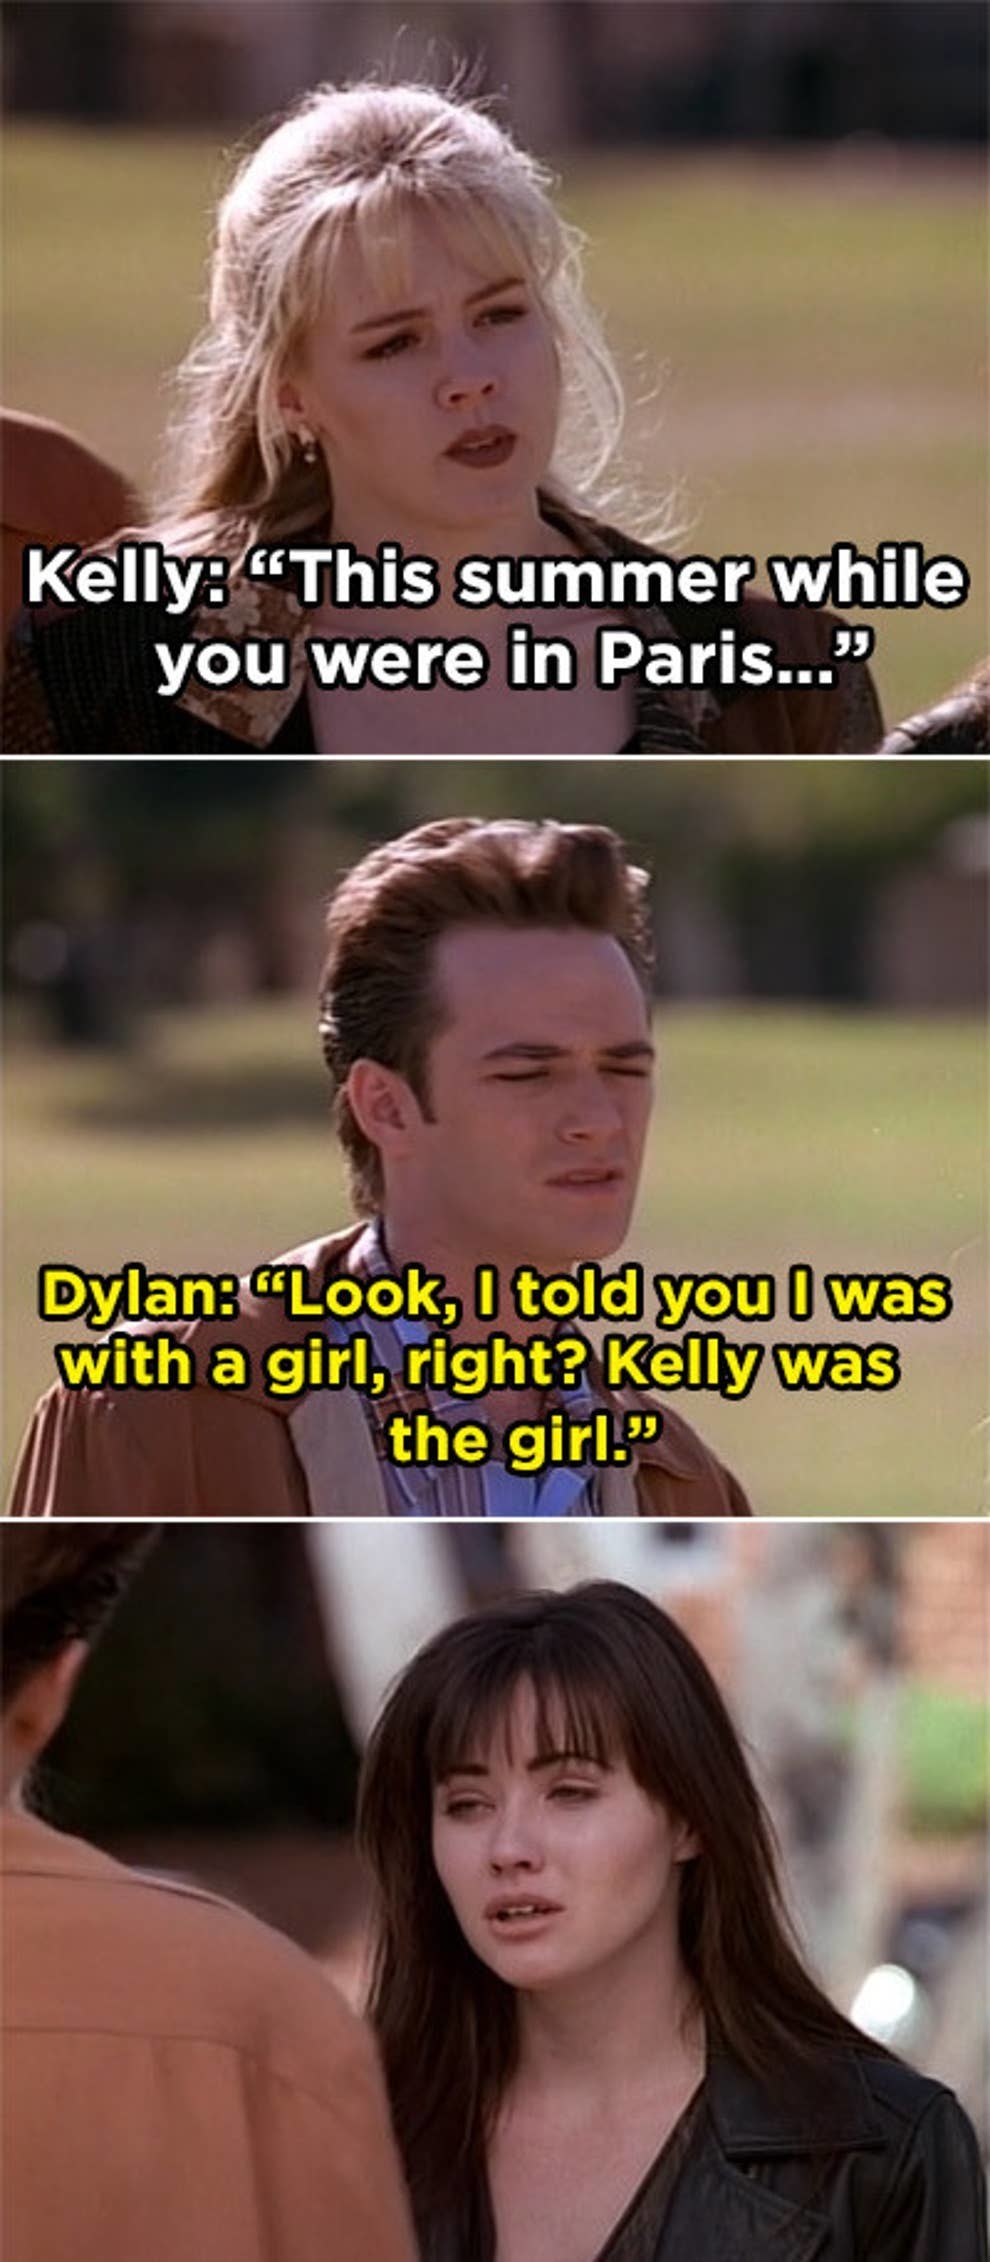 Kelly: &quot;This summer while you were in Paris...&quot; Dylan: &quot;Look I told you I was with a girl right? Kelly was the girl,&quot; Brenda stares and looked shocked and hurt